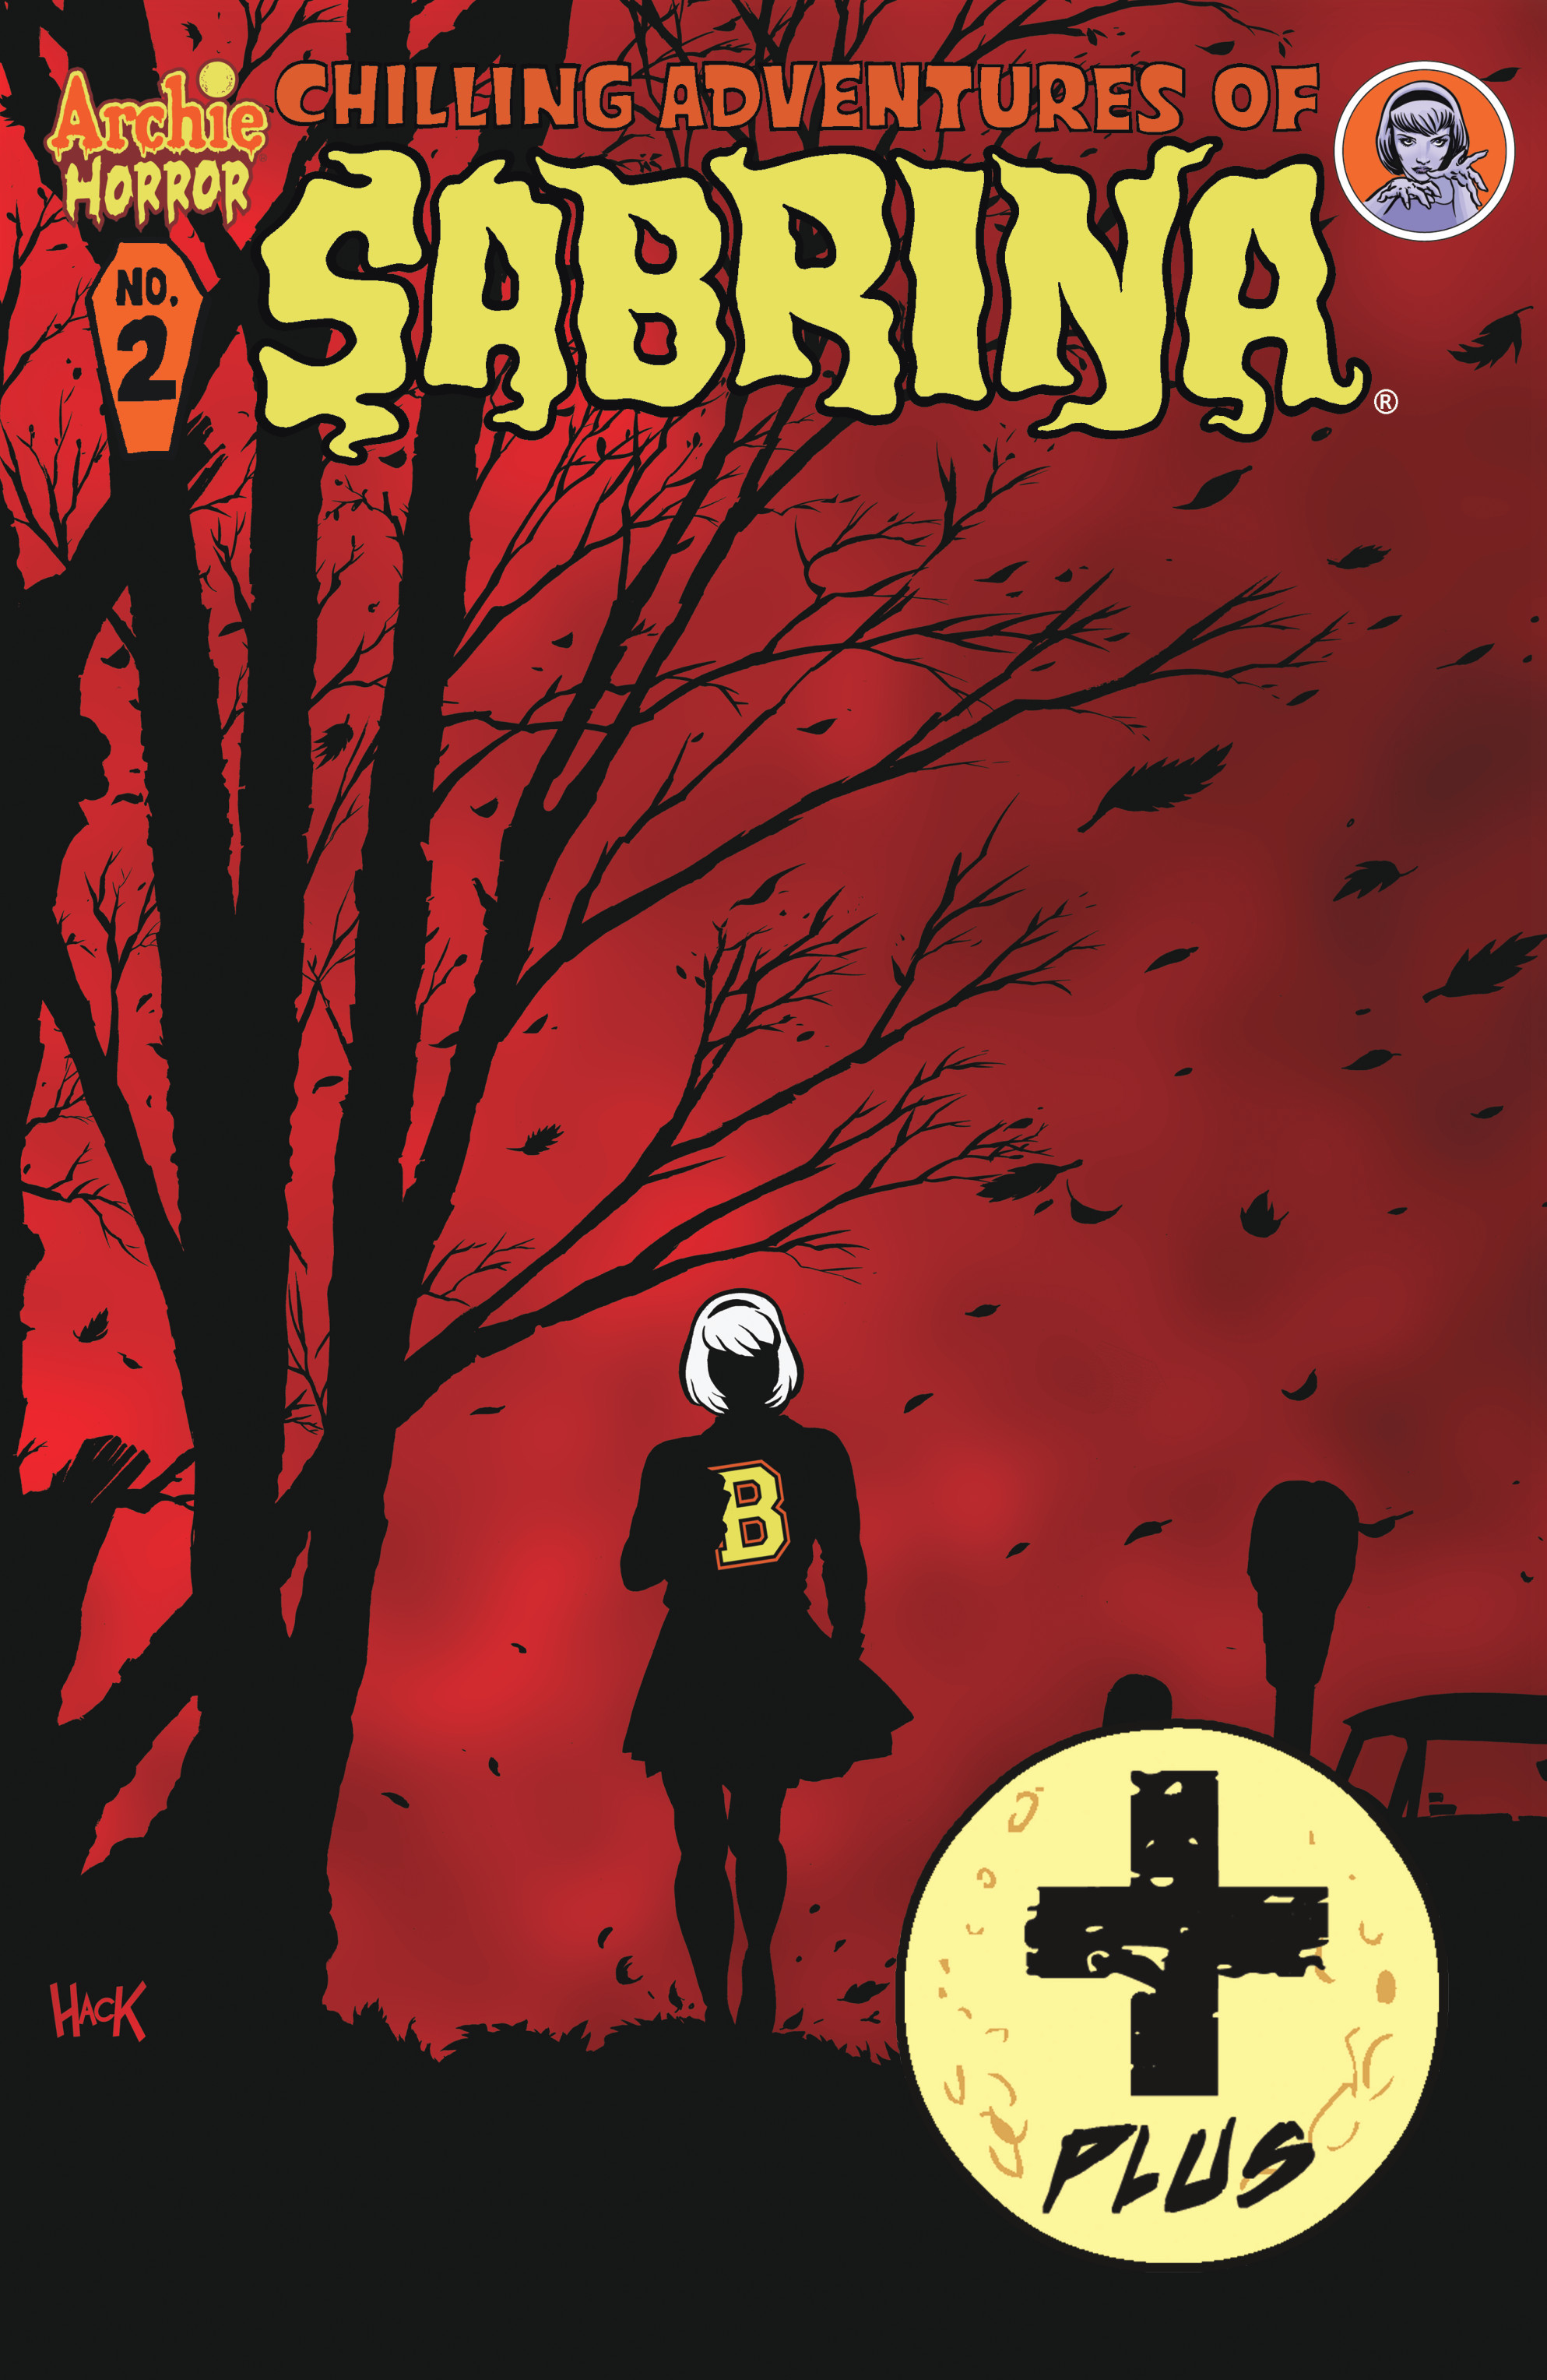 Read online Chilling Adventures of Sabrina comic -  Issue #2 - 2